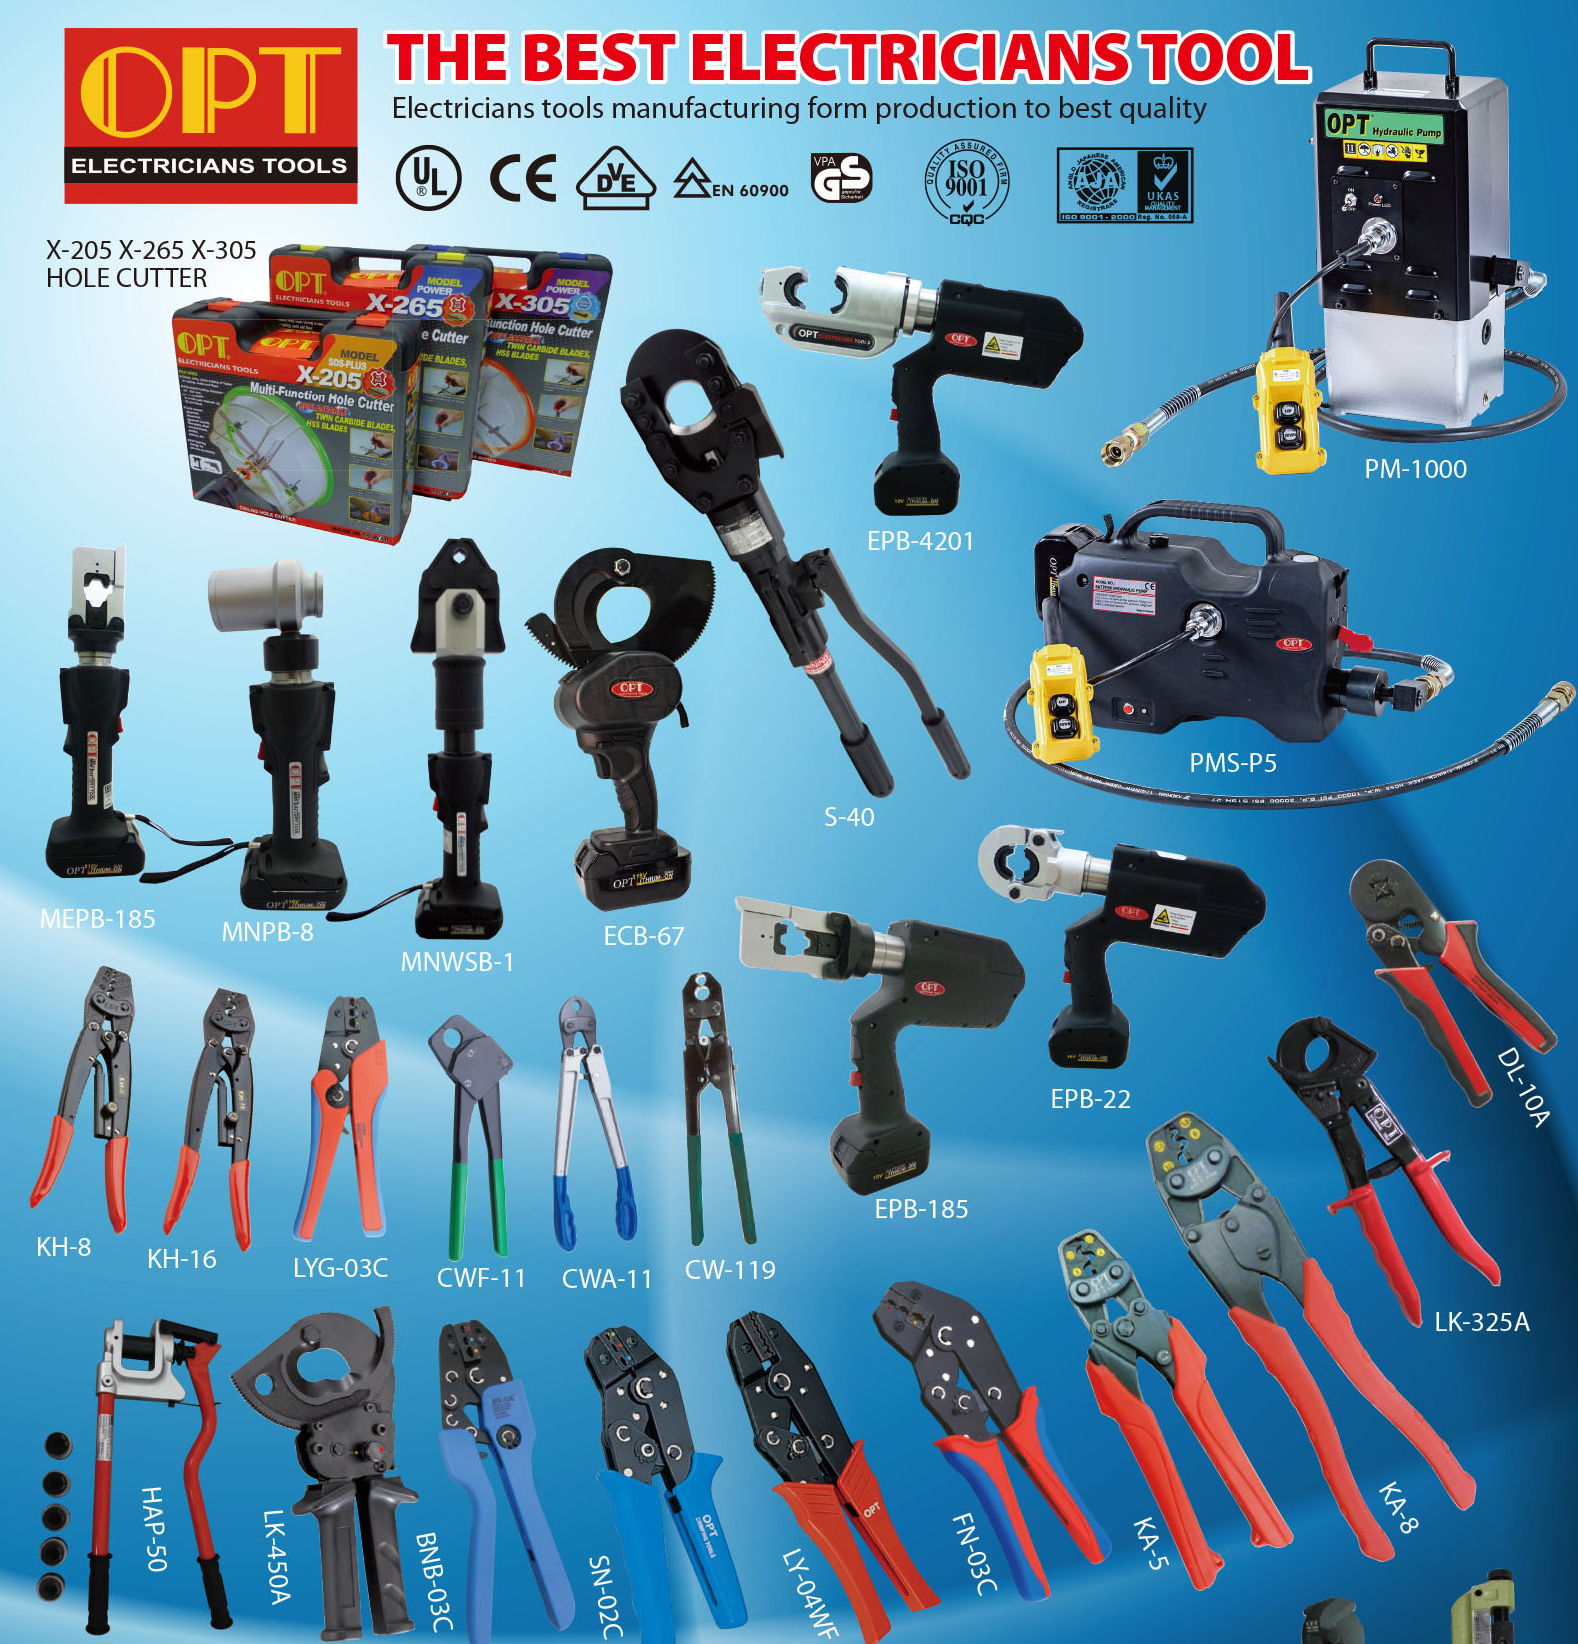 OPT professional tools help professional electricians to make connection.